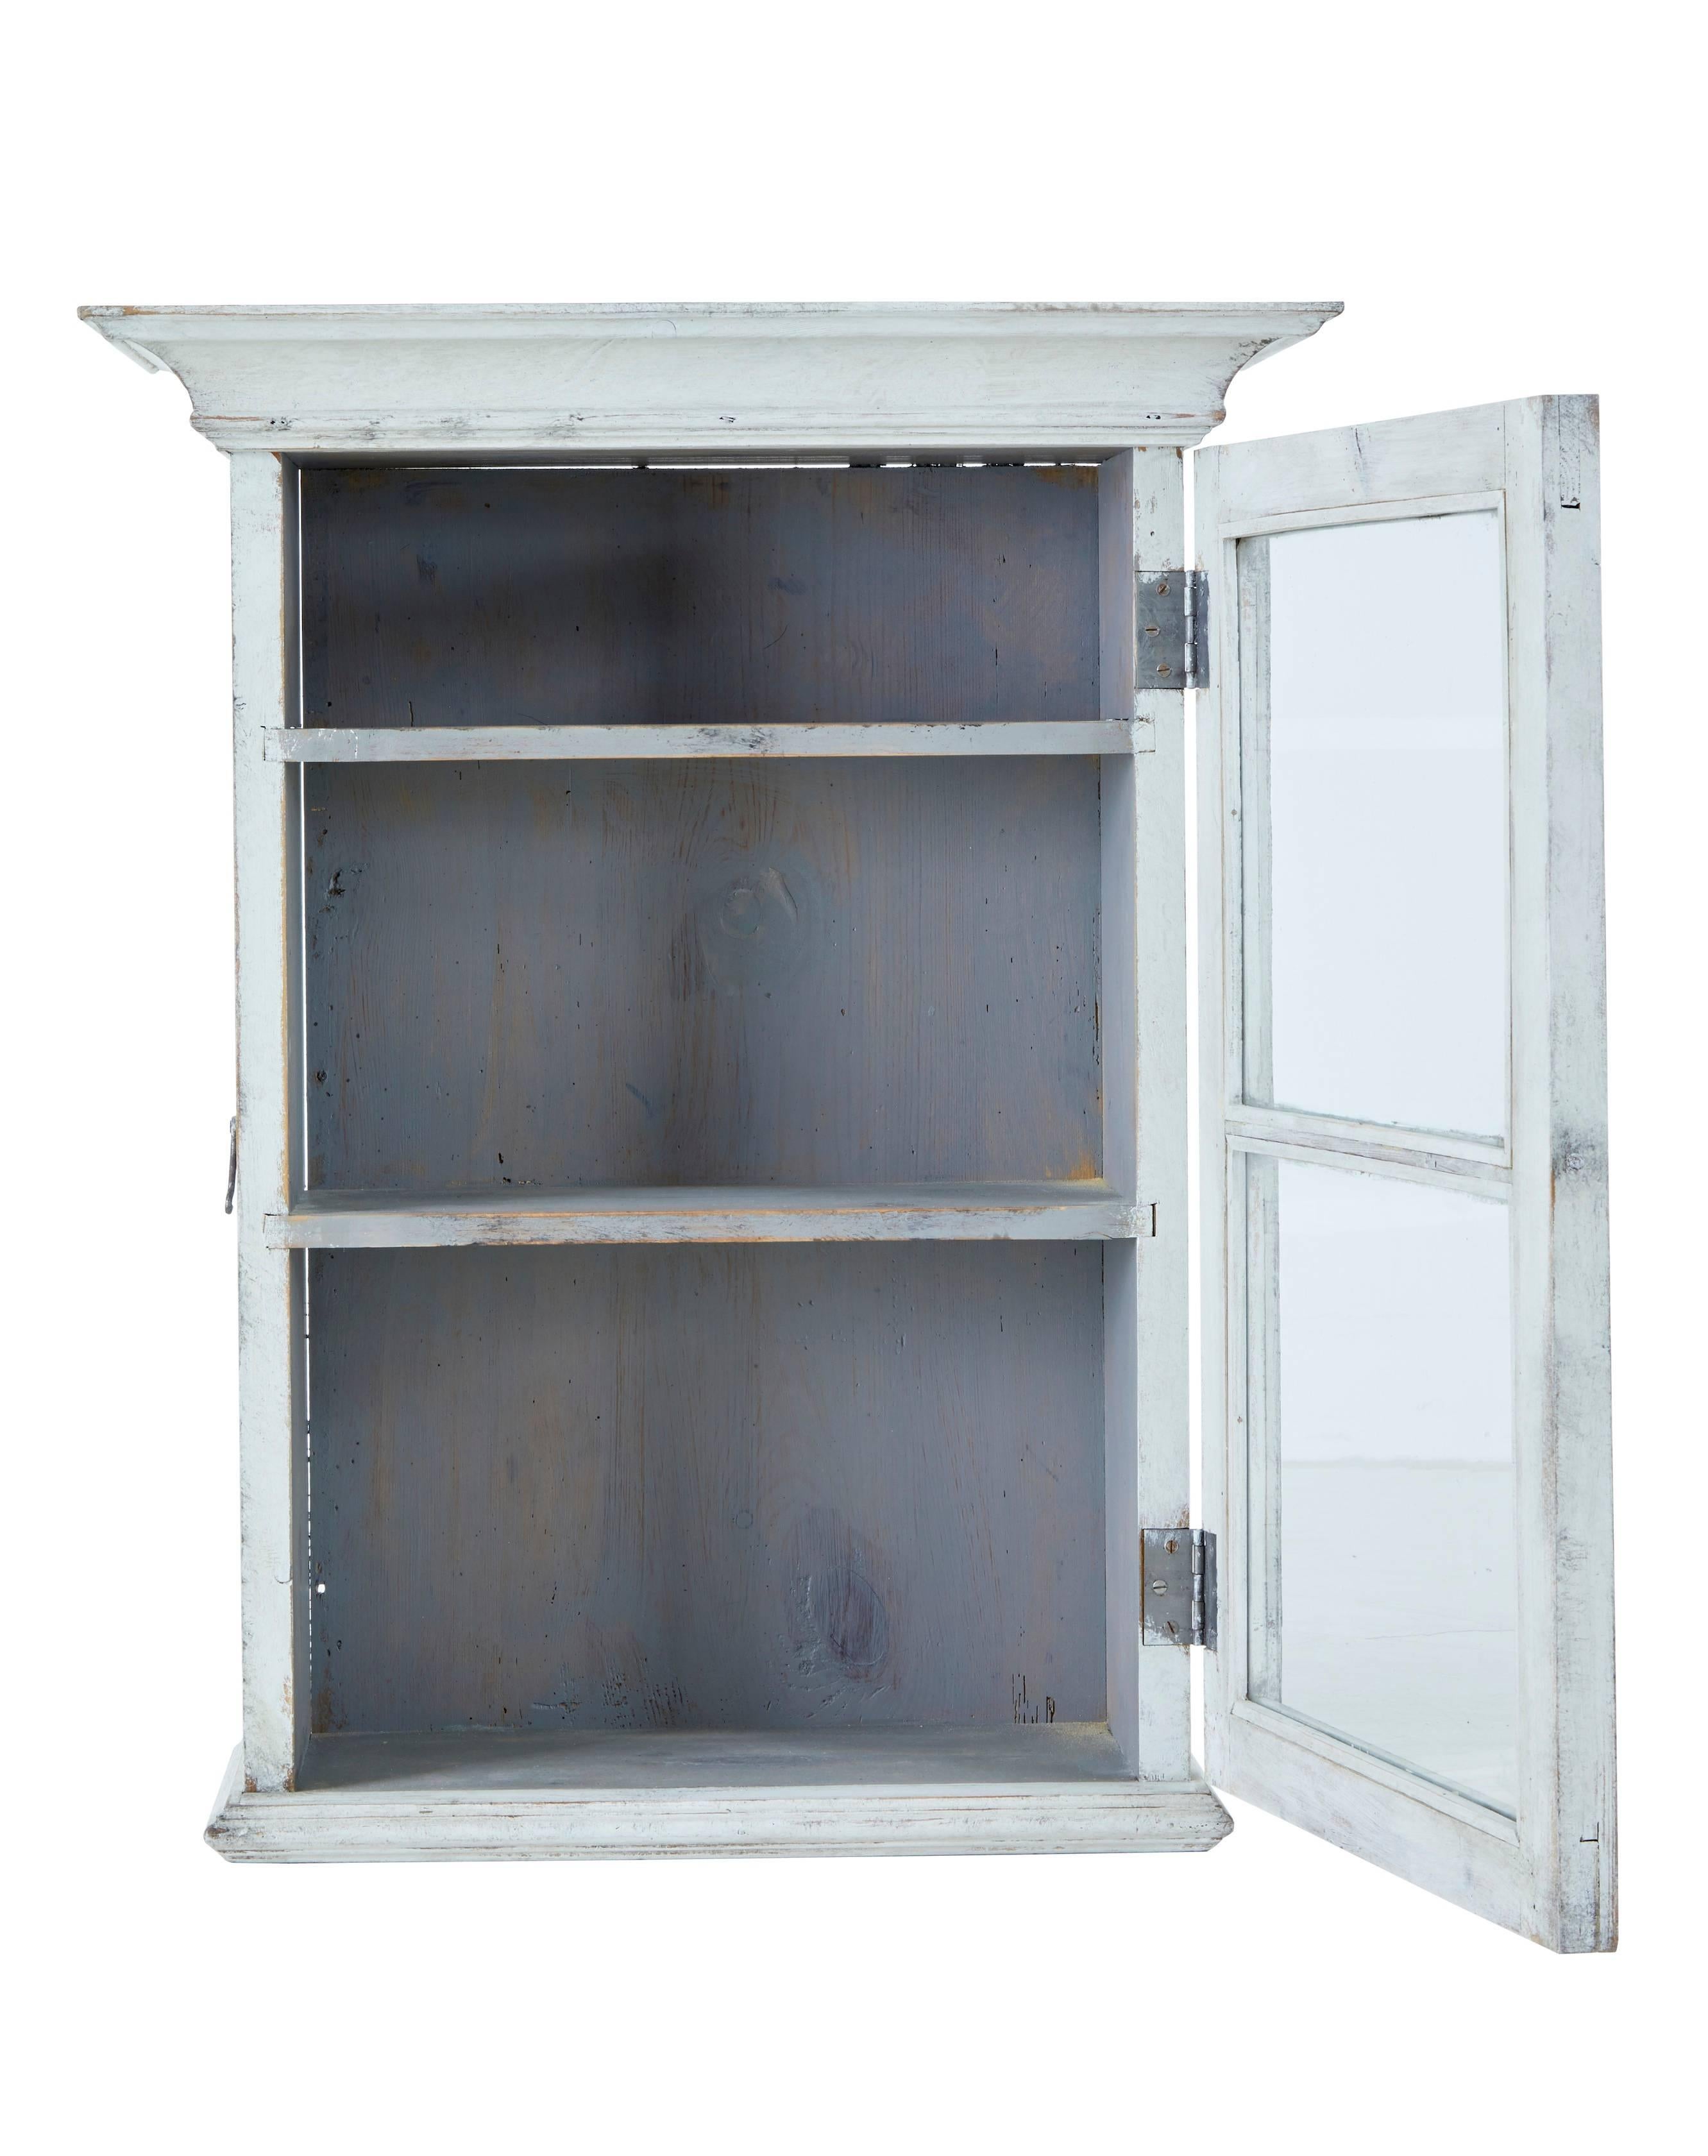 Single door glazed cabinet, circa 1890.
Door with original glazing opens to reveal two shelves. Ideal for the bathroom or hallway.
Later faded and distressed paint.

Measures: Height 30 1/4